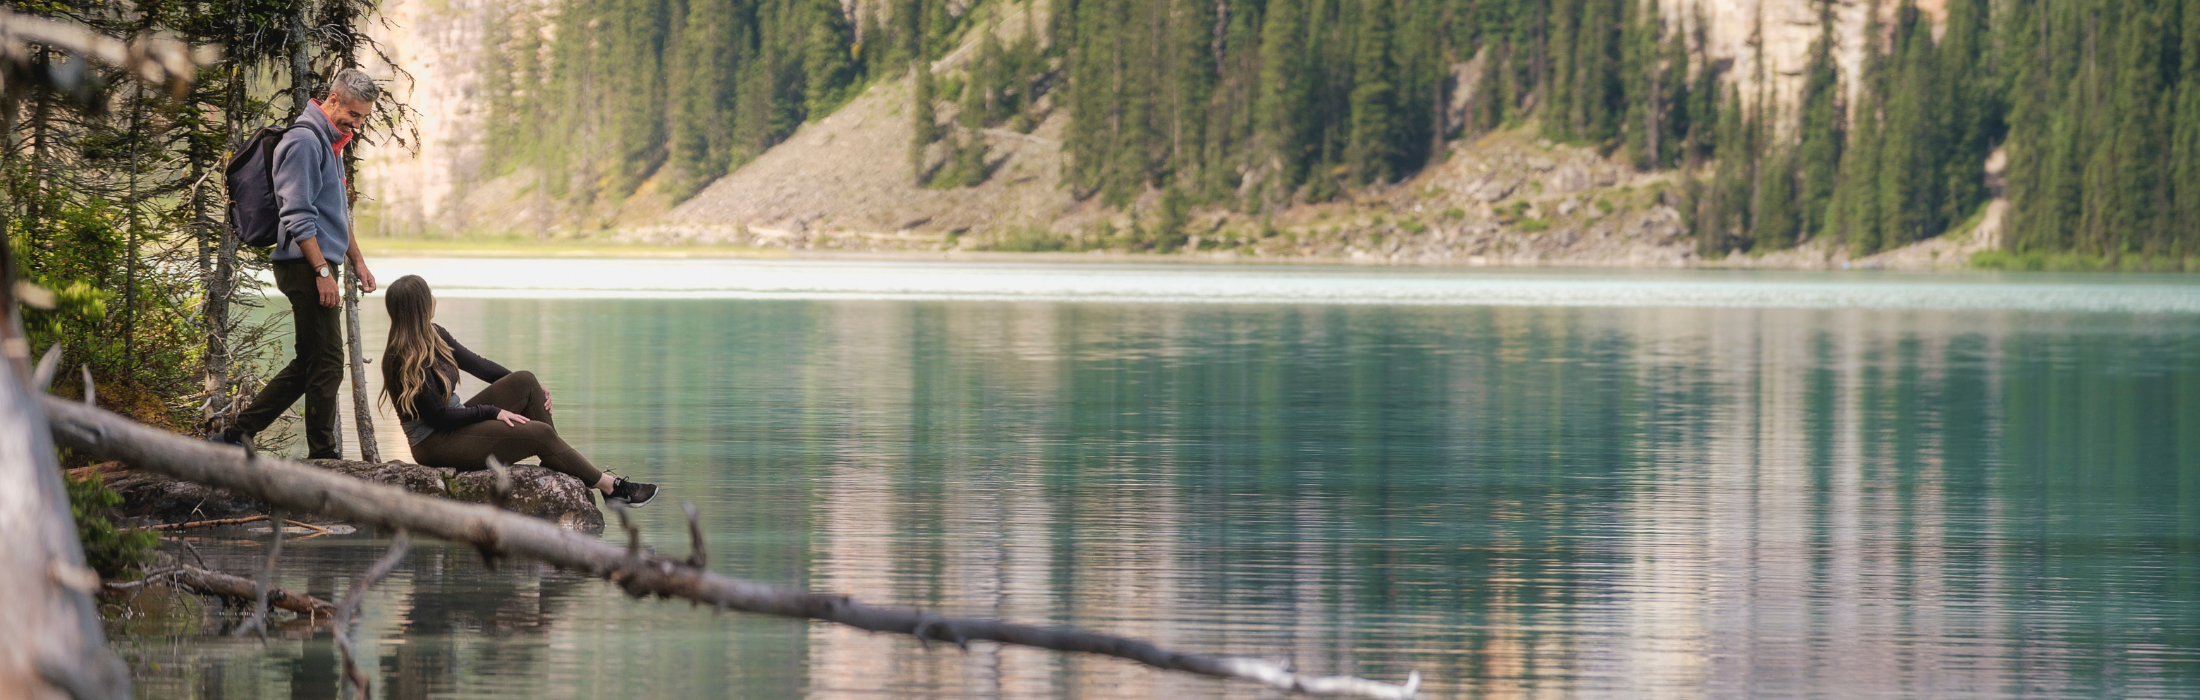 A Couple on Lake Louise shoreline in Spring/Summer